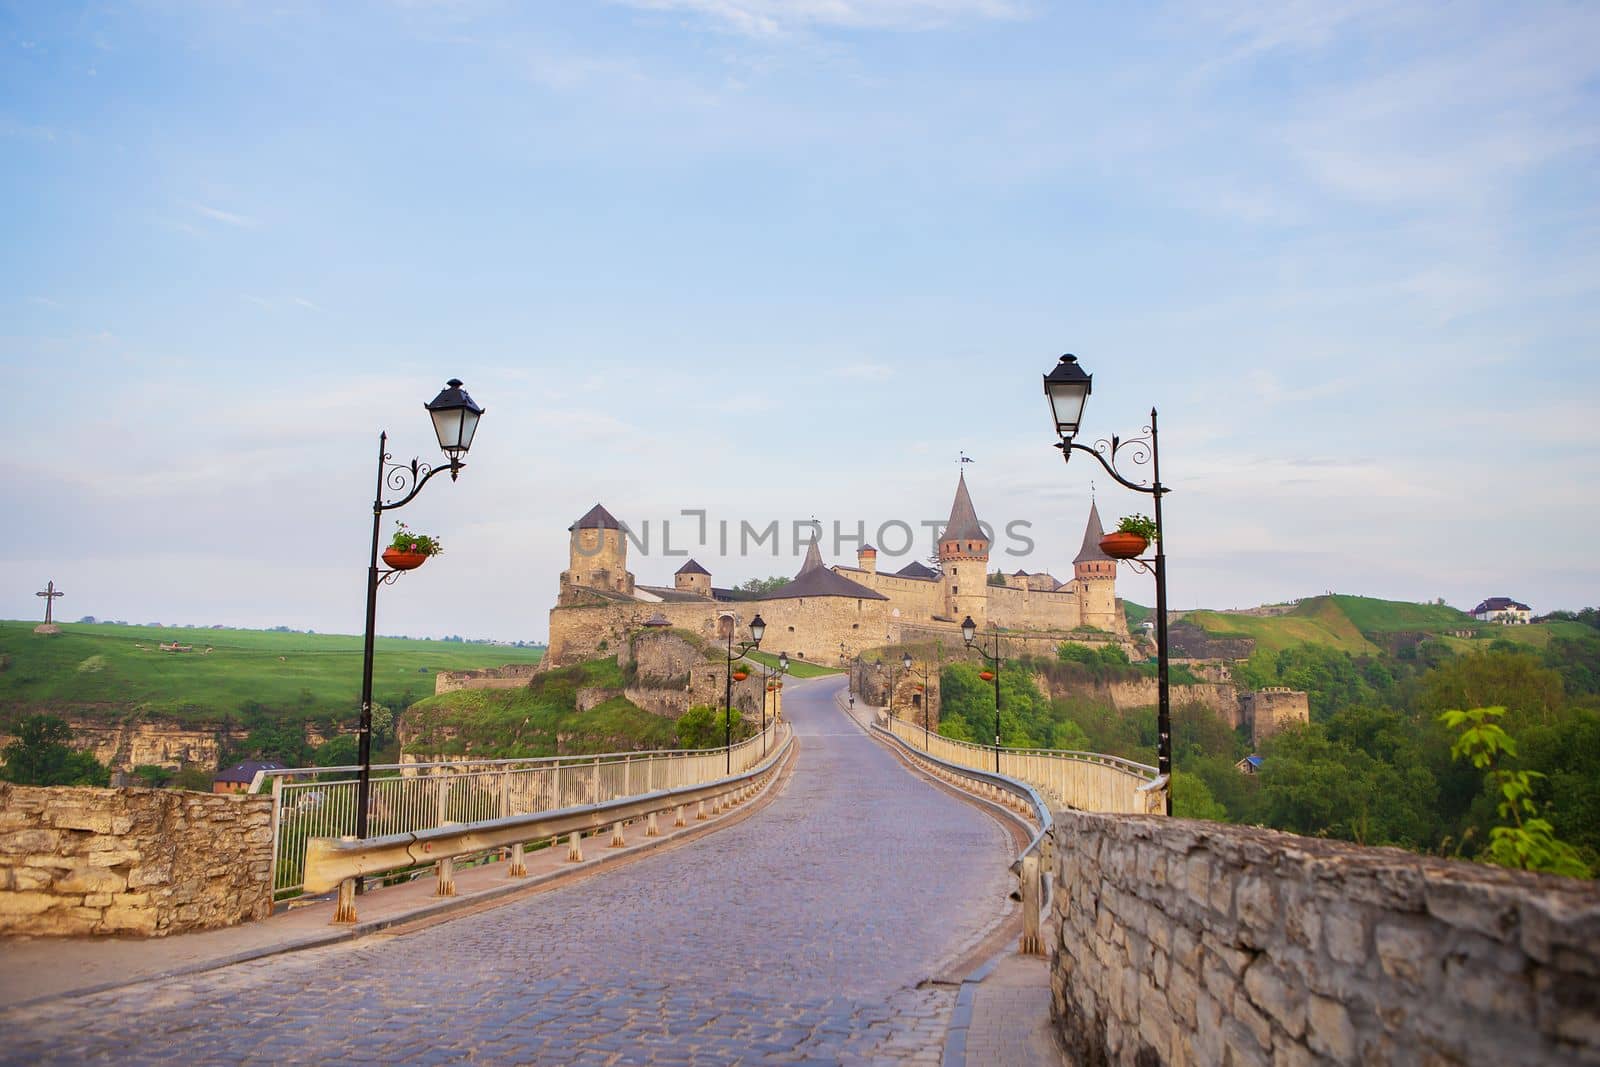 Kamianets-Podilskyi is a romantic city. A picturesque summer view of the ancient castle-fortress in Kamianets-Podilskyi, Khmelnytskyi region, Ukraine. by sfinks